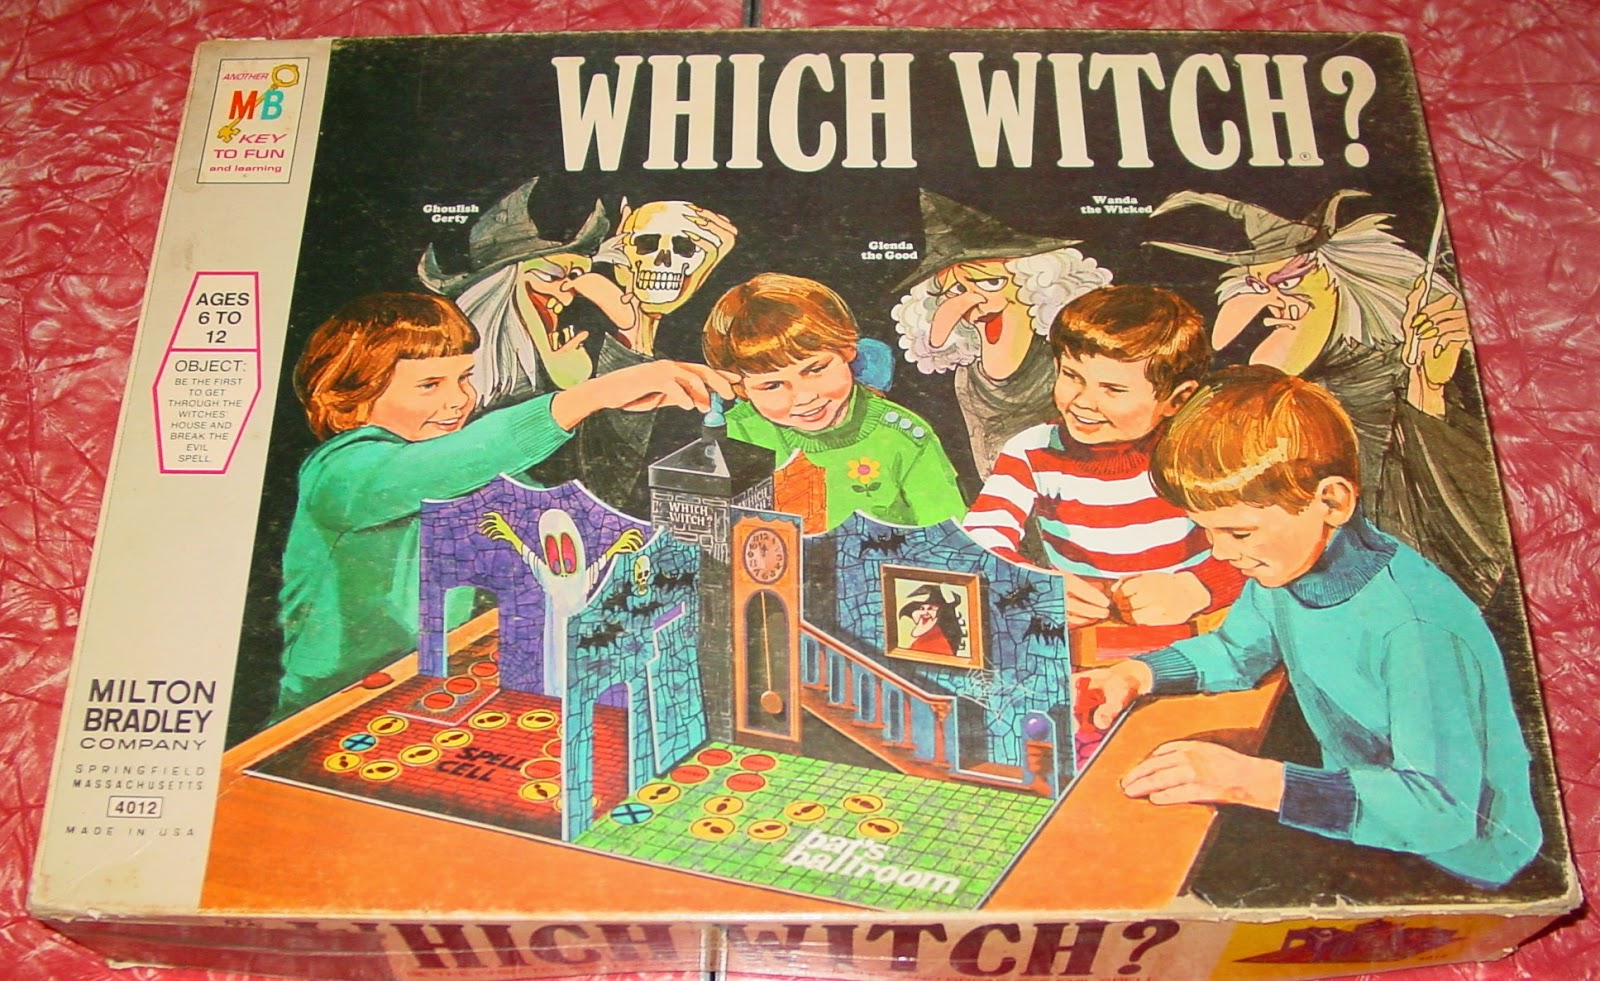 vintage toys - haunted house board game - Another Which Witch? Eu To Fun Ghoulish the Wicked Certy Glenda the Good mm To Ages 6 To 12 Object Be The First To Get Through The Witches House And Break The Evil Spell re Milton Bradley Company Springfield Massa